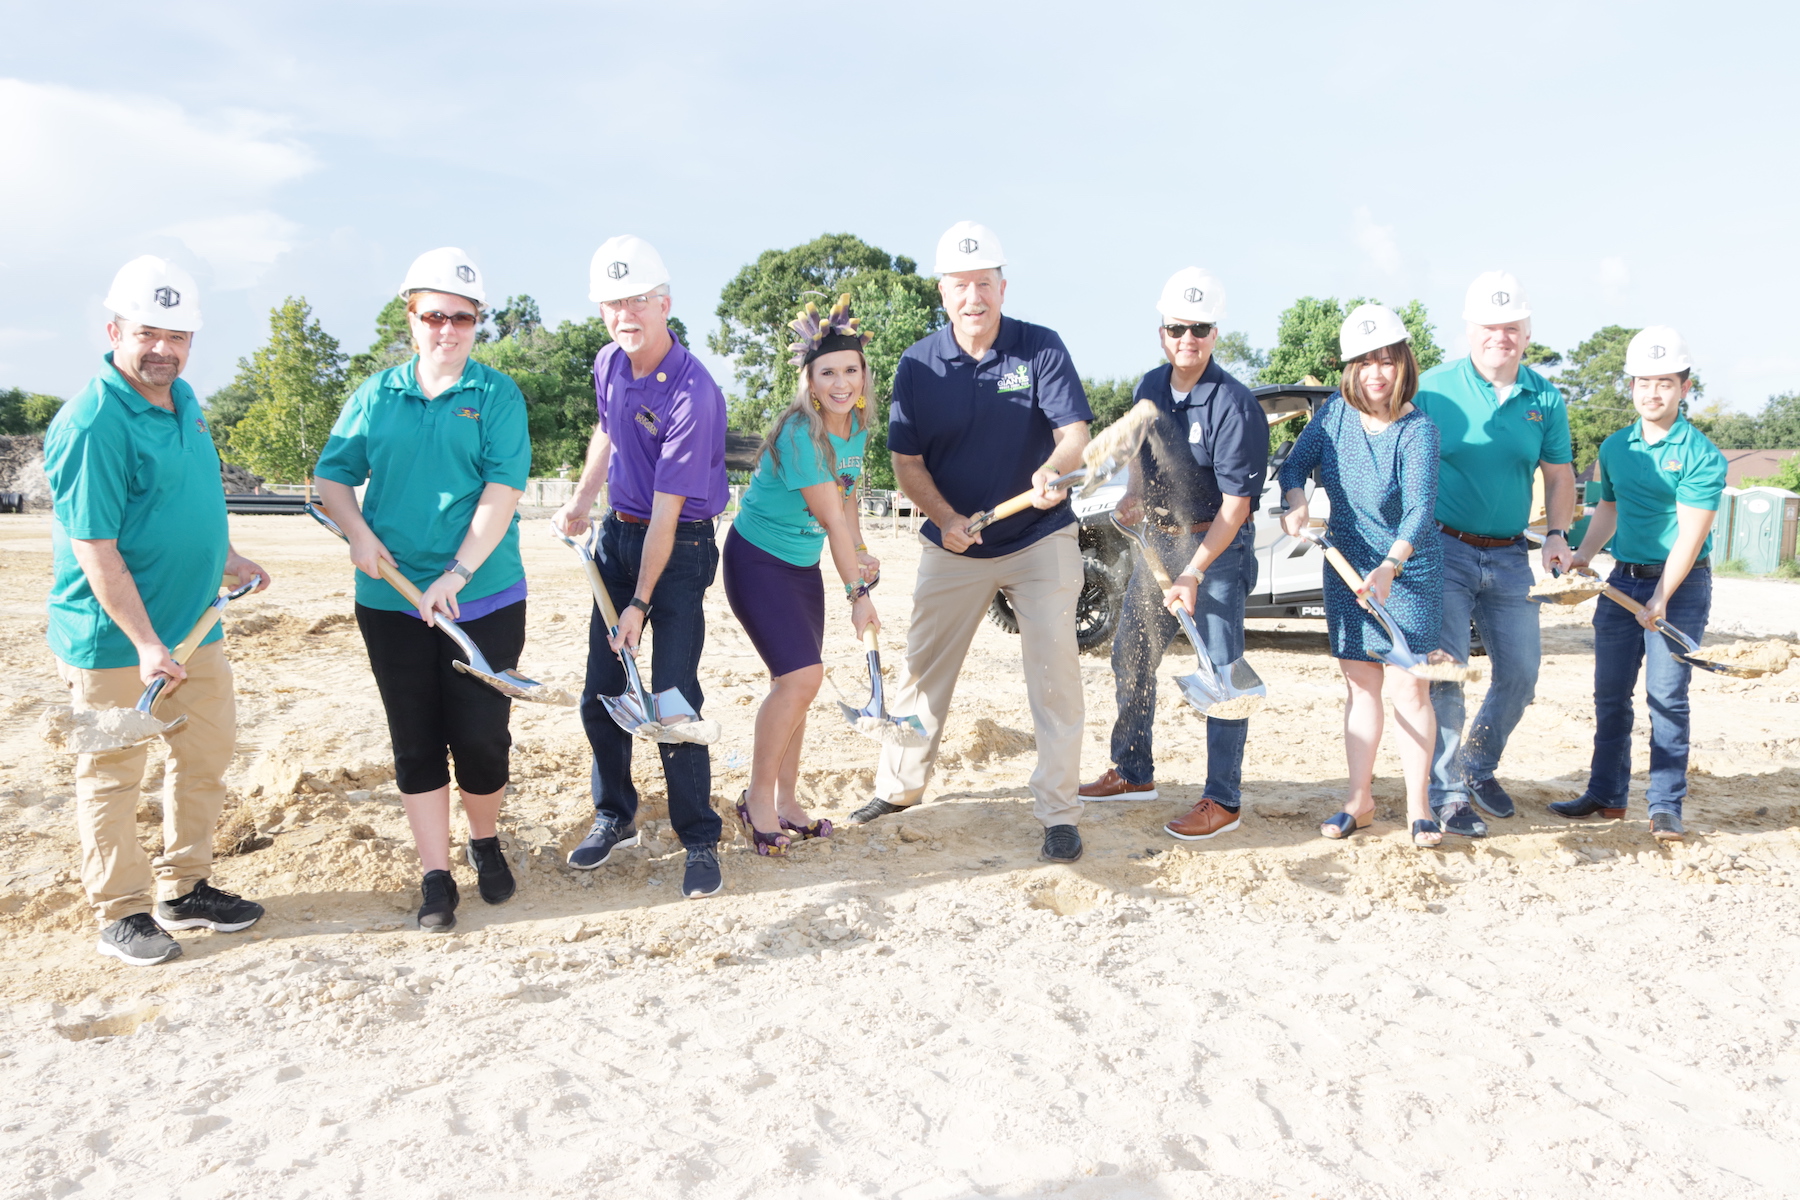 District leaders and architect employees break ground on robotics center